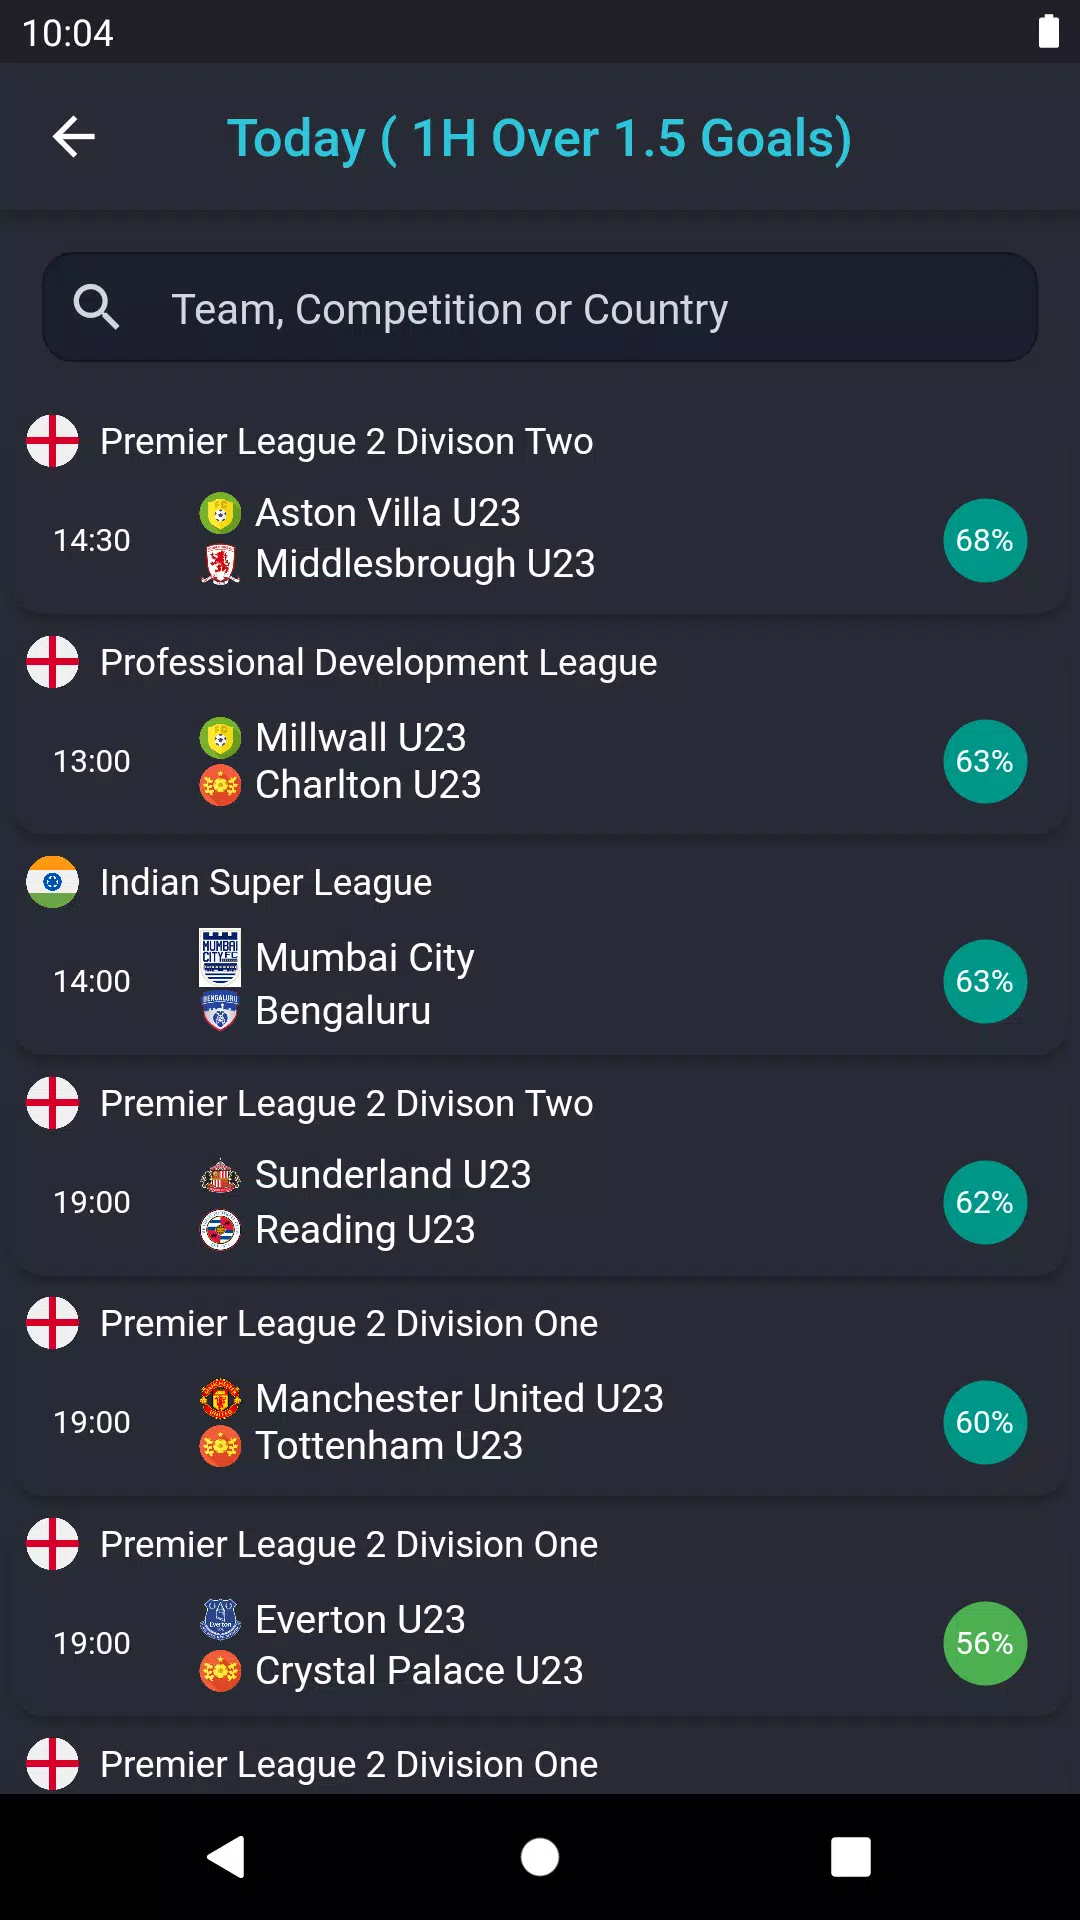 FootyStats Lite - Soccer Stats for Android - Free App Download